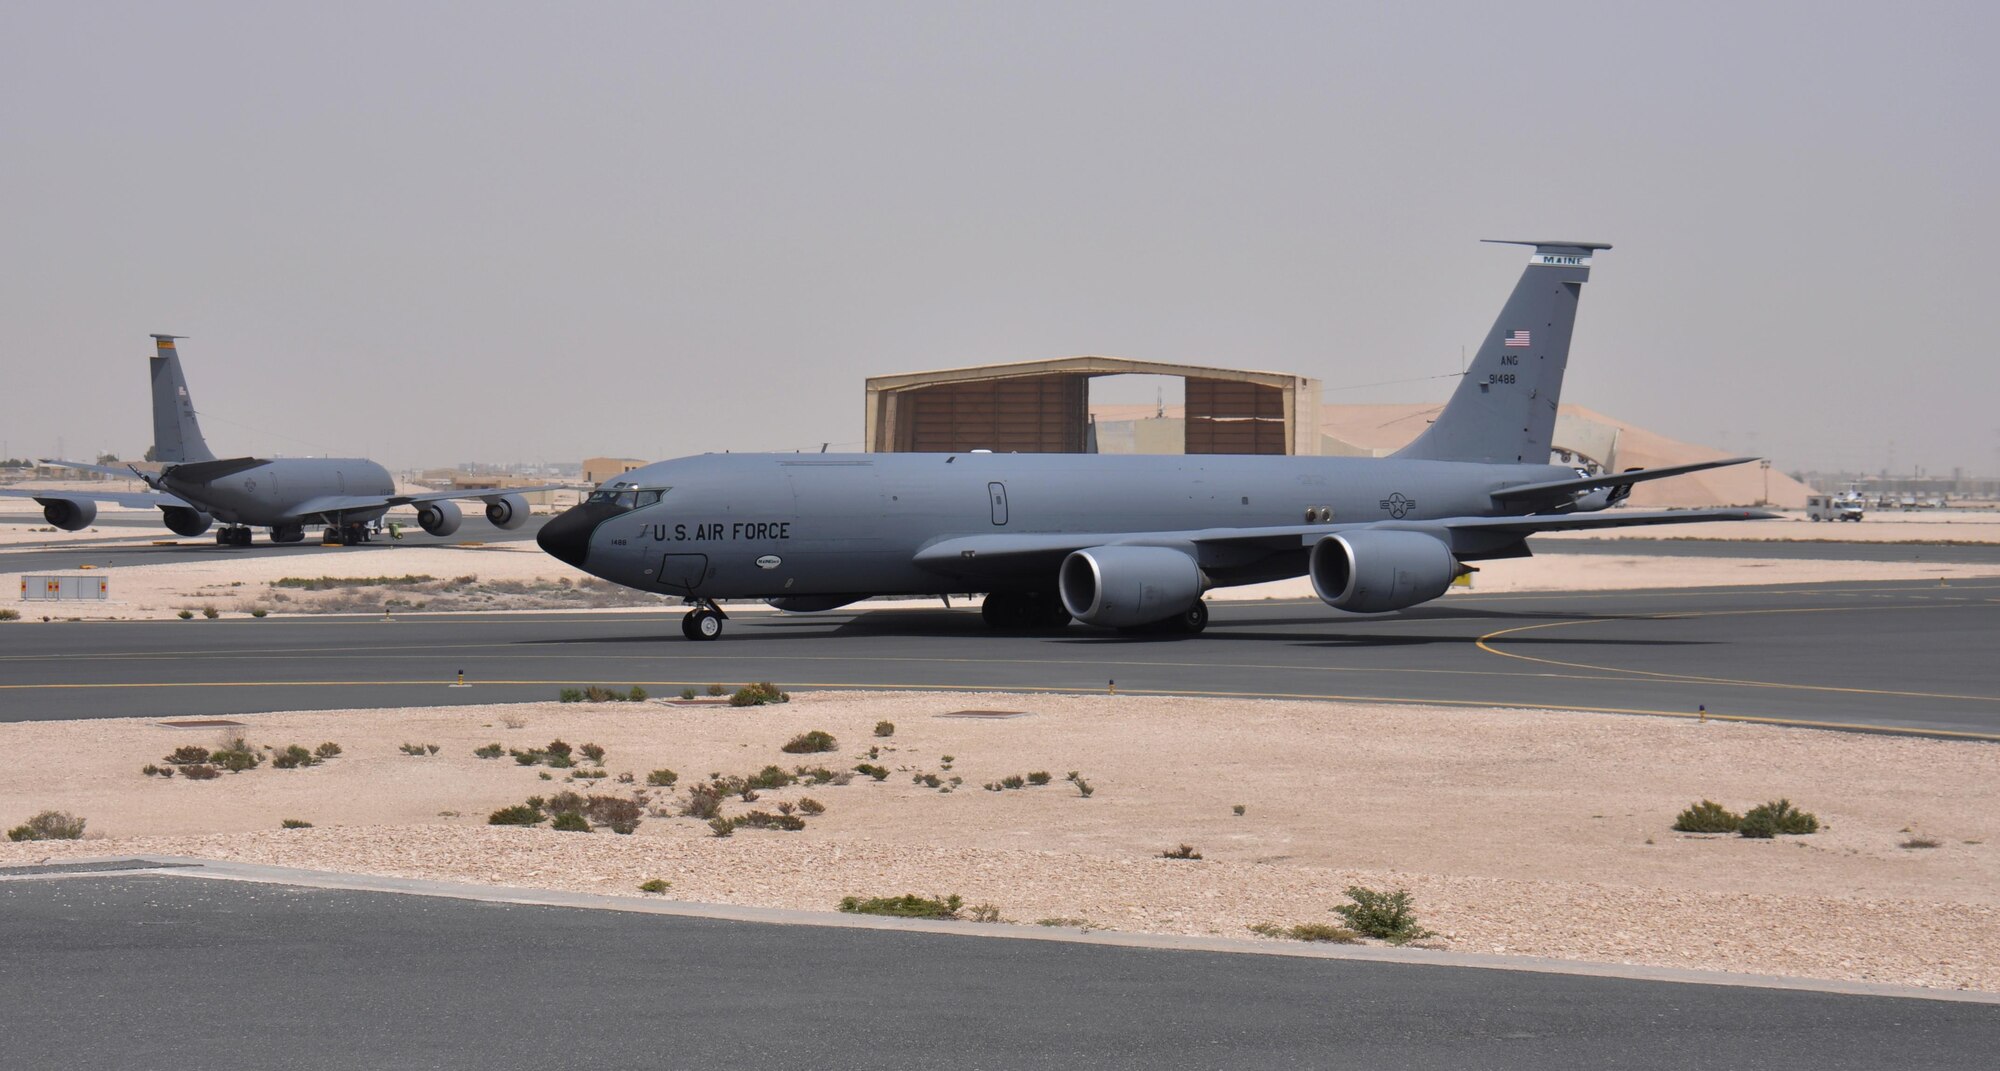 A KC-135 Stratotanker taxis to the runway at Al Udeid Air Base, Qatar March 27. Ensuring aircraft, like the one pictured here, take-off safely is one of the many responsibilities of the 379th Operations Support Squadron’s Airfield Management team. The team inspects AUAB’s airfield every day, more than 49 million square feet of pavement. Any discrepancies that could interfere with flying operations are reported and dealt with quickly. In 2015, the 379 EOSS Airfield Management team supported more than 20,000 sorties. (U.S. Air Force photo by Tech. Sgt. James Hodgman/Released)